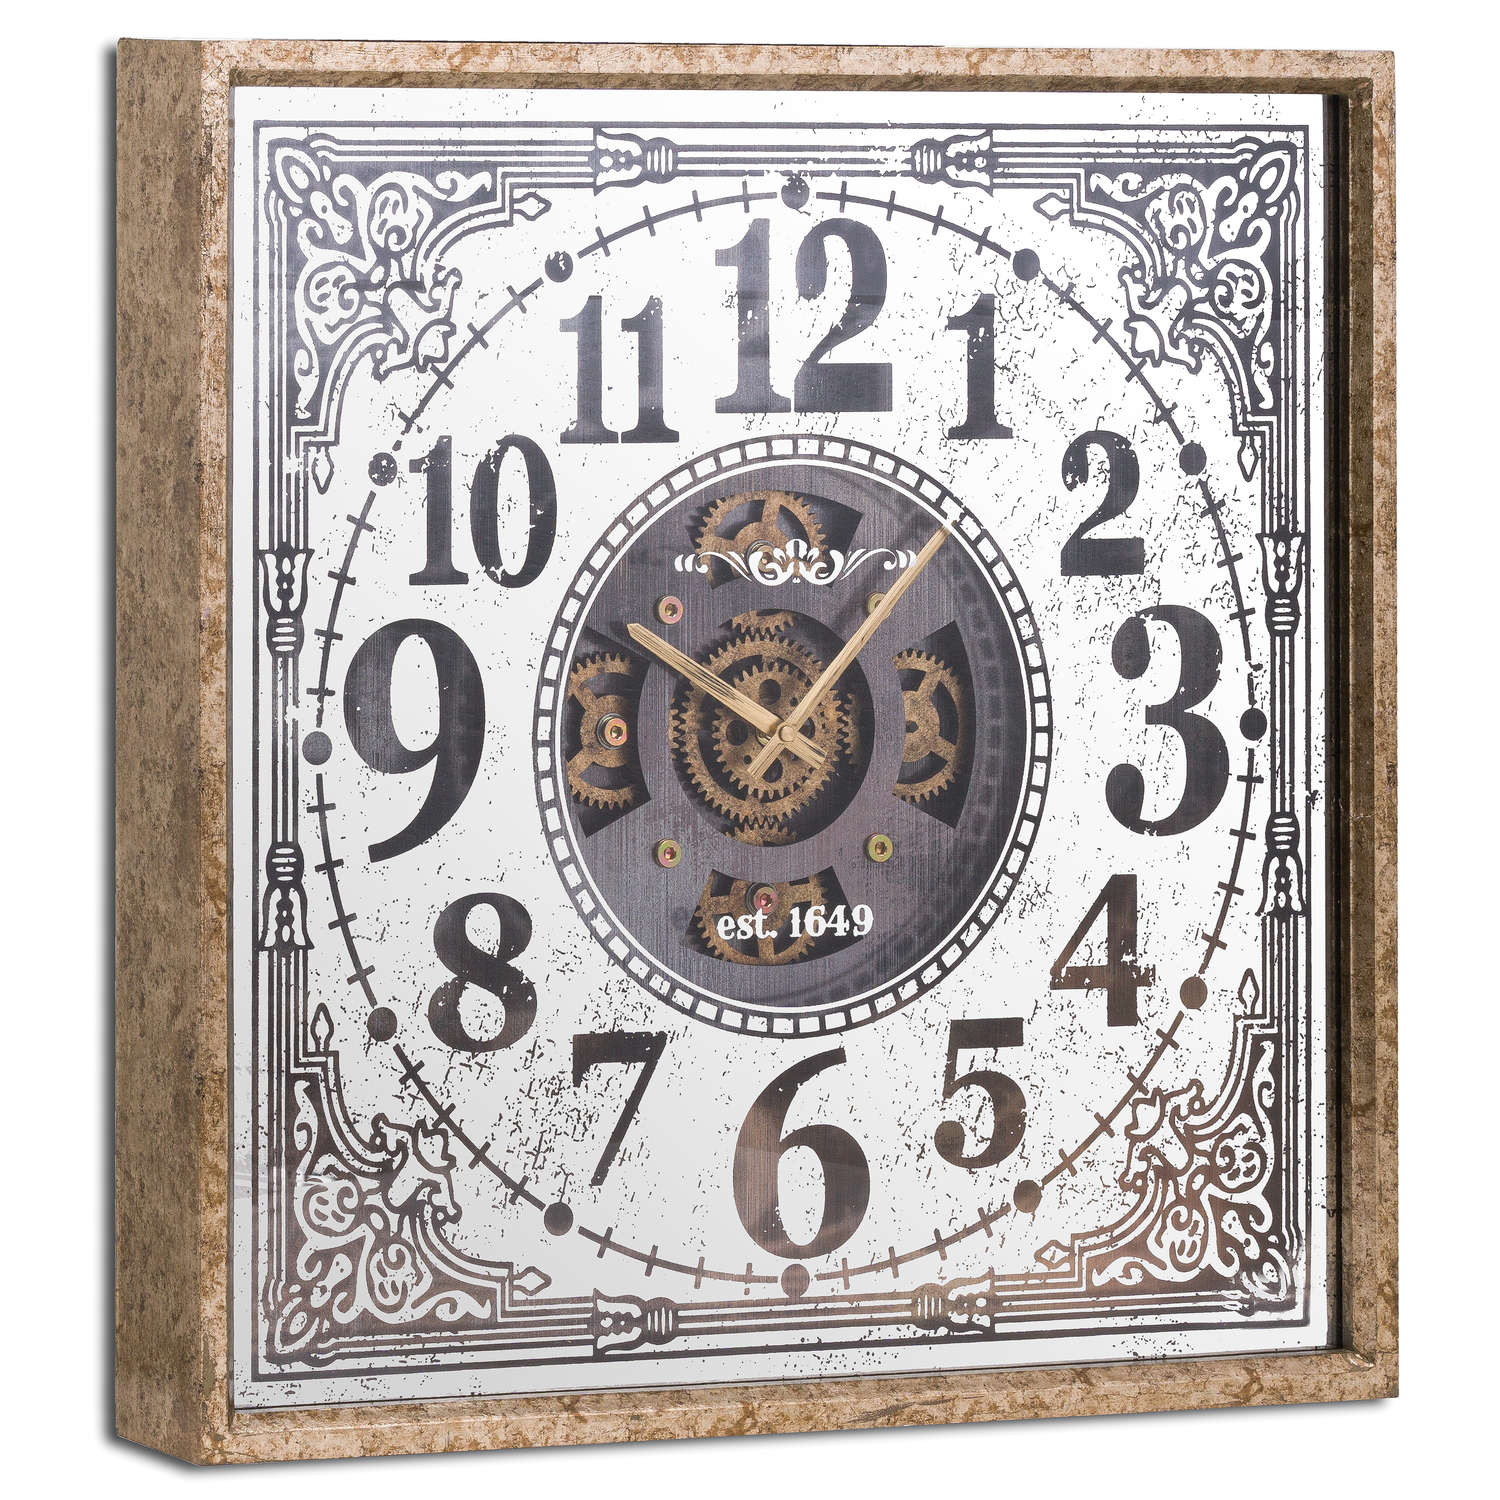 View Mirrored Moving Mechanism Wall Clock information